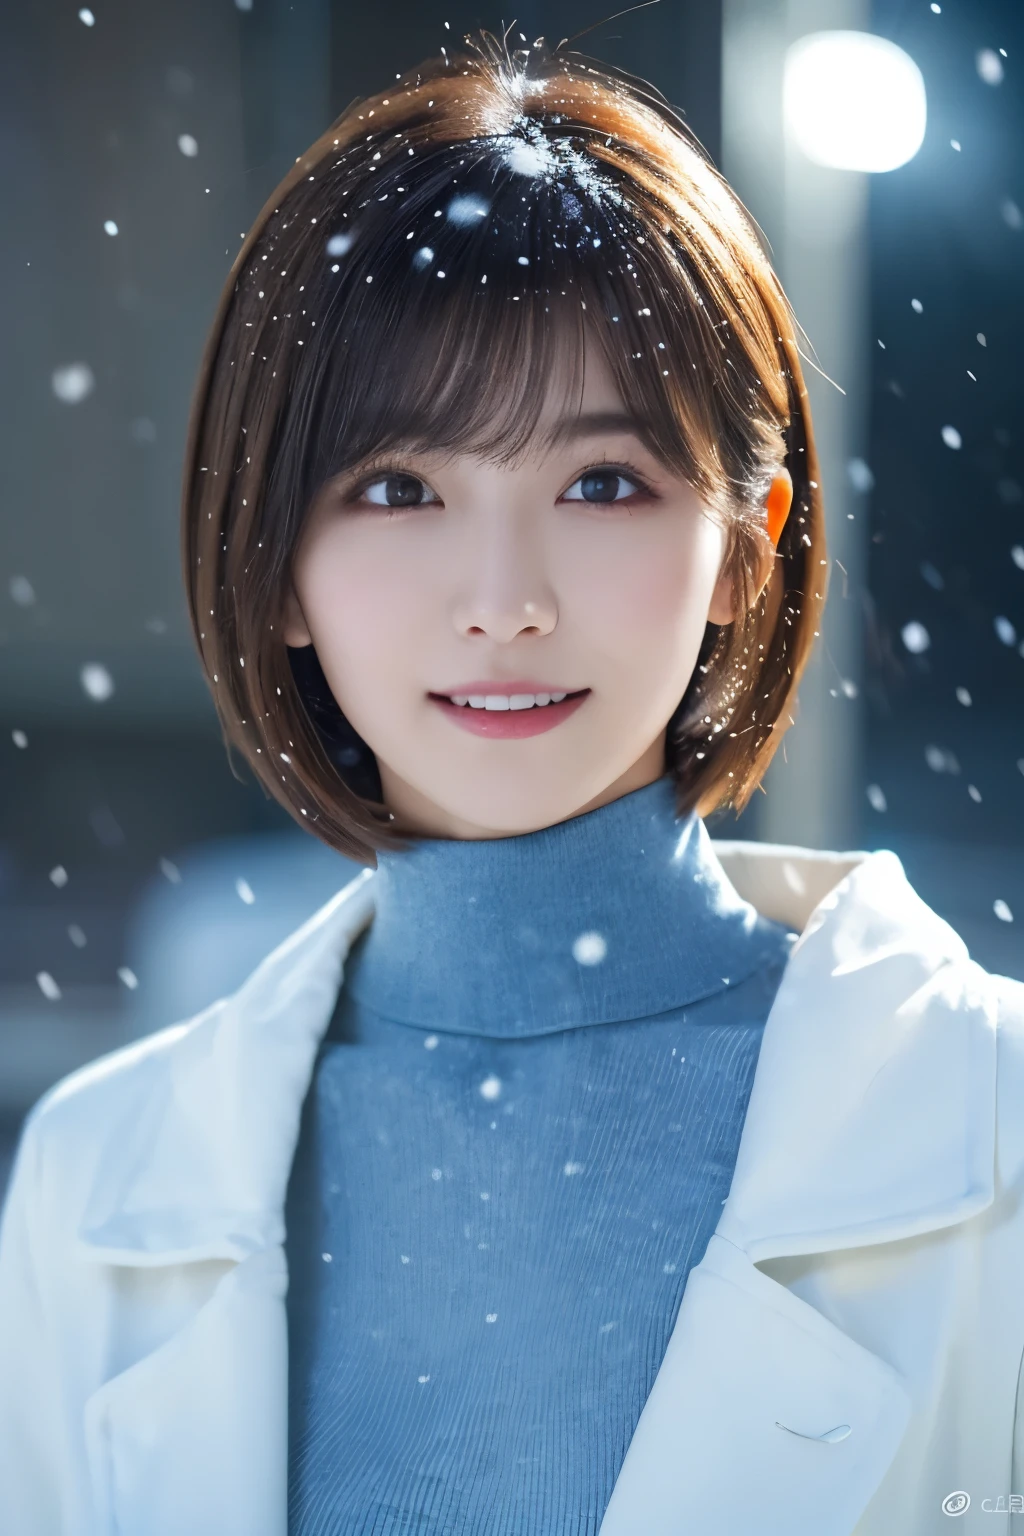 1girl in, (White coat, light blue turtleneck:1.2), 
(Raw photo, Best Quality), (Realistic, Photorealsitic:1.4), masutepiece, 
Extremely delicate and beautiful, Extremely detailed, 2k wallpaper, amazing, finely detail, the Extremely Detailed CG Unity 8K Wallpapers, Ultra-detailed, hight resolution, 
Soft light, Beautiful detailed girl, extremely detailed eye and face, beautiful detailed nose, Beautiful detailed eyes, Cinematic lighting, 
(plein air:1.3), illuminated fountain at night, light reflections, It's snowing,
 Perfect Anatomy, Slender body, Small, 
Straight short hair, Bangs, Looking at Viewer, A slight smil